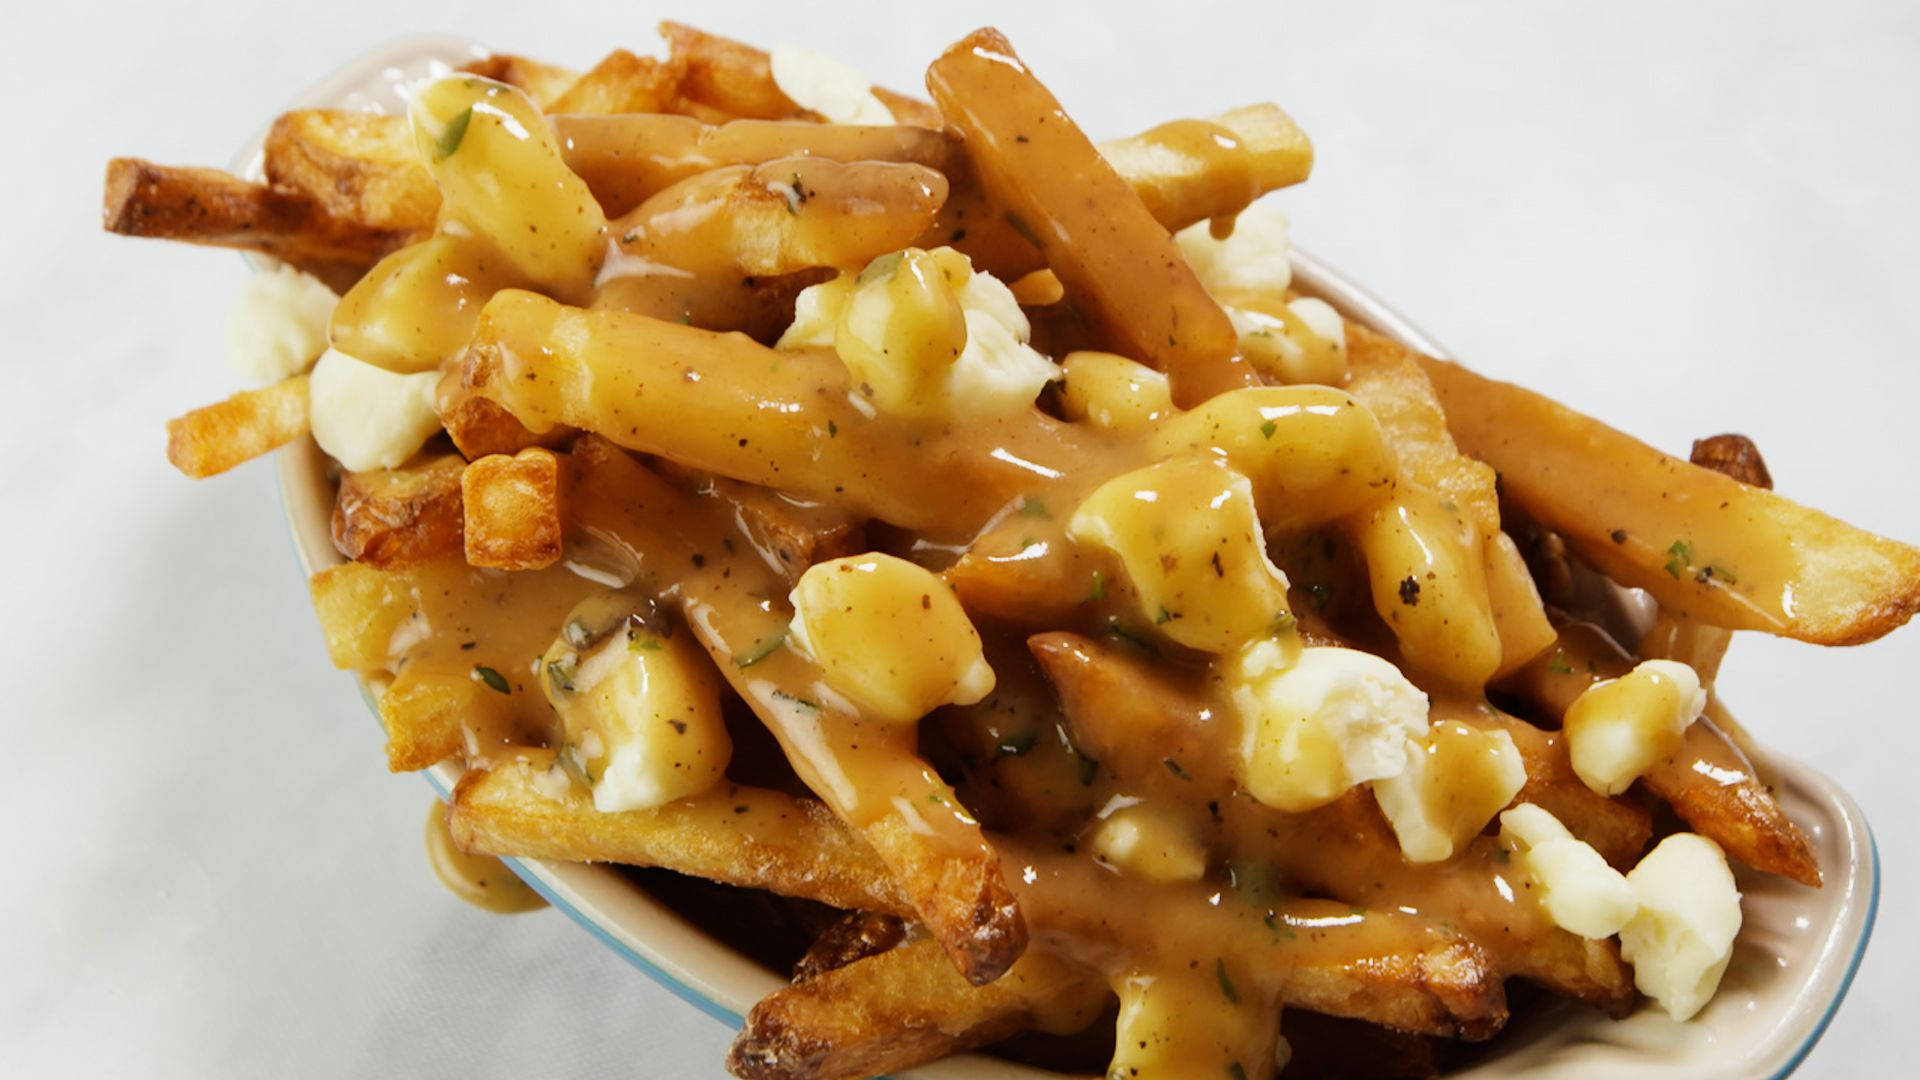 Savory Poutine Platter with Gravy and Fries Wallpaper